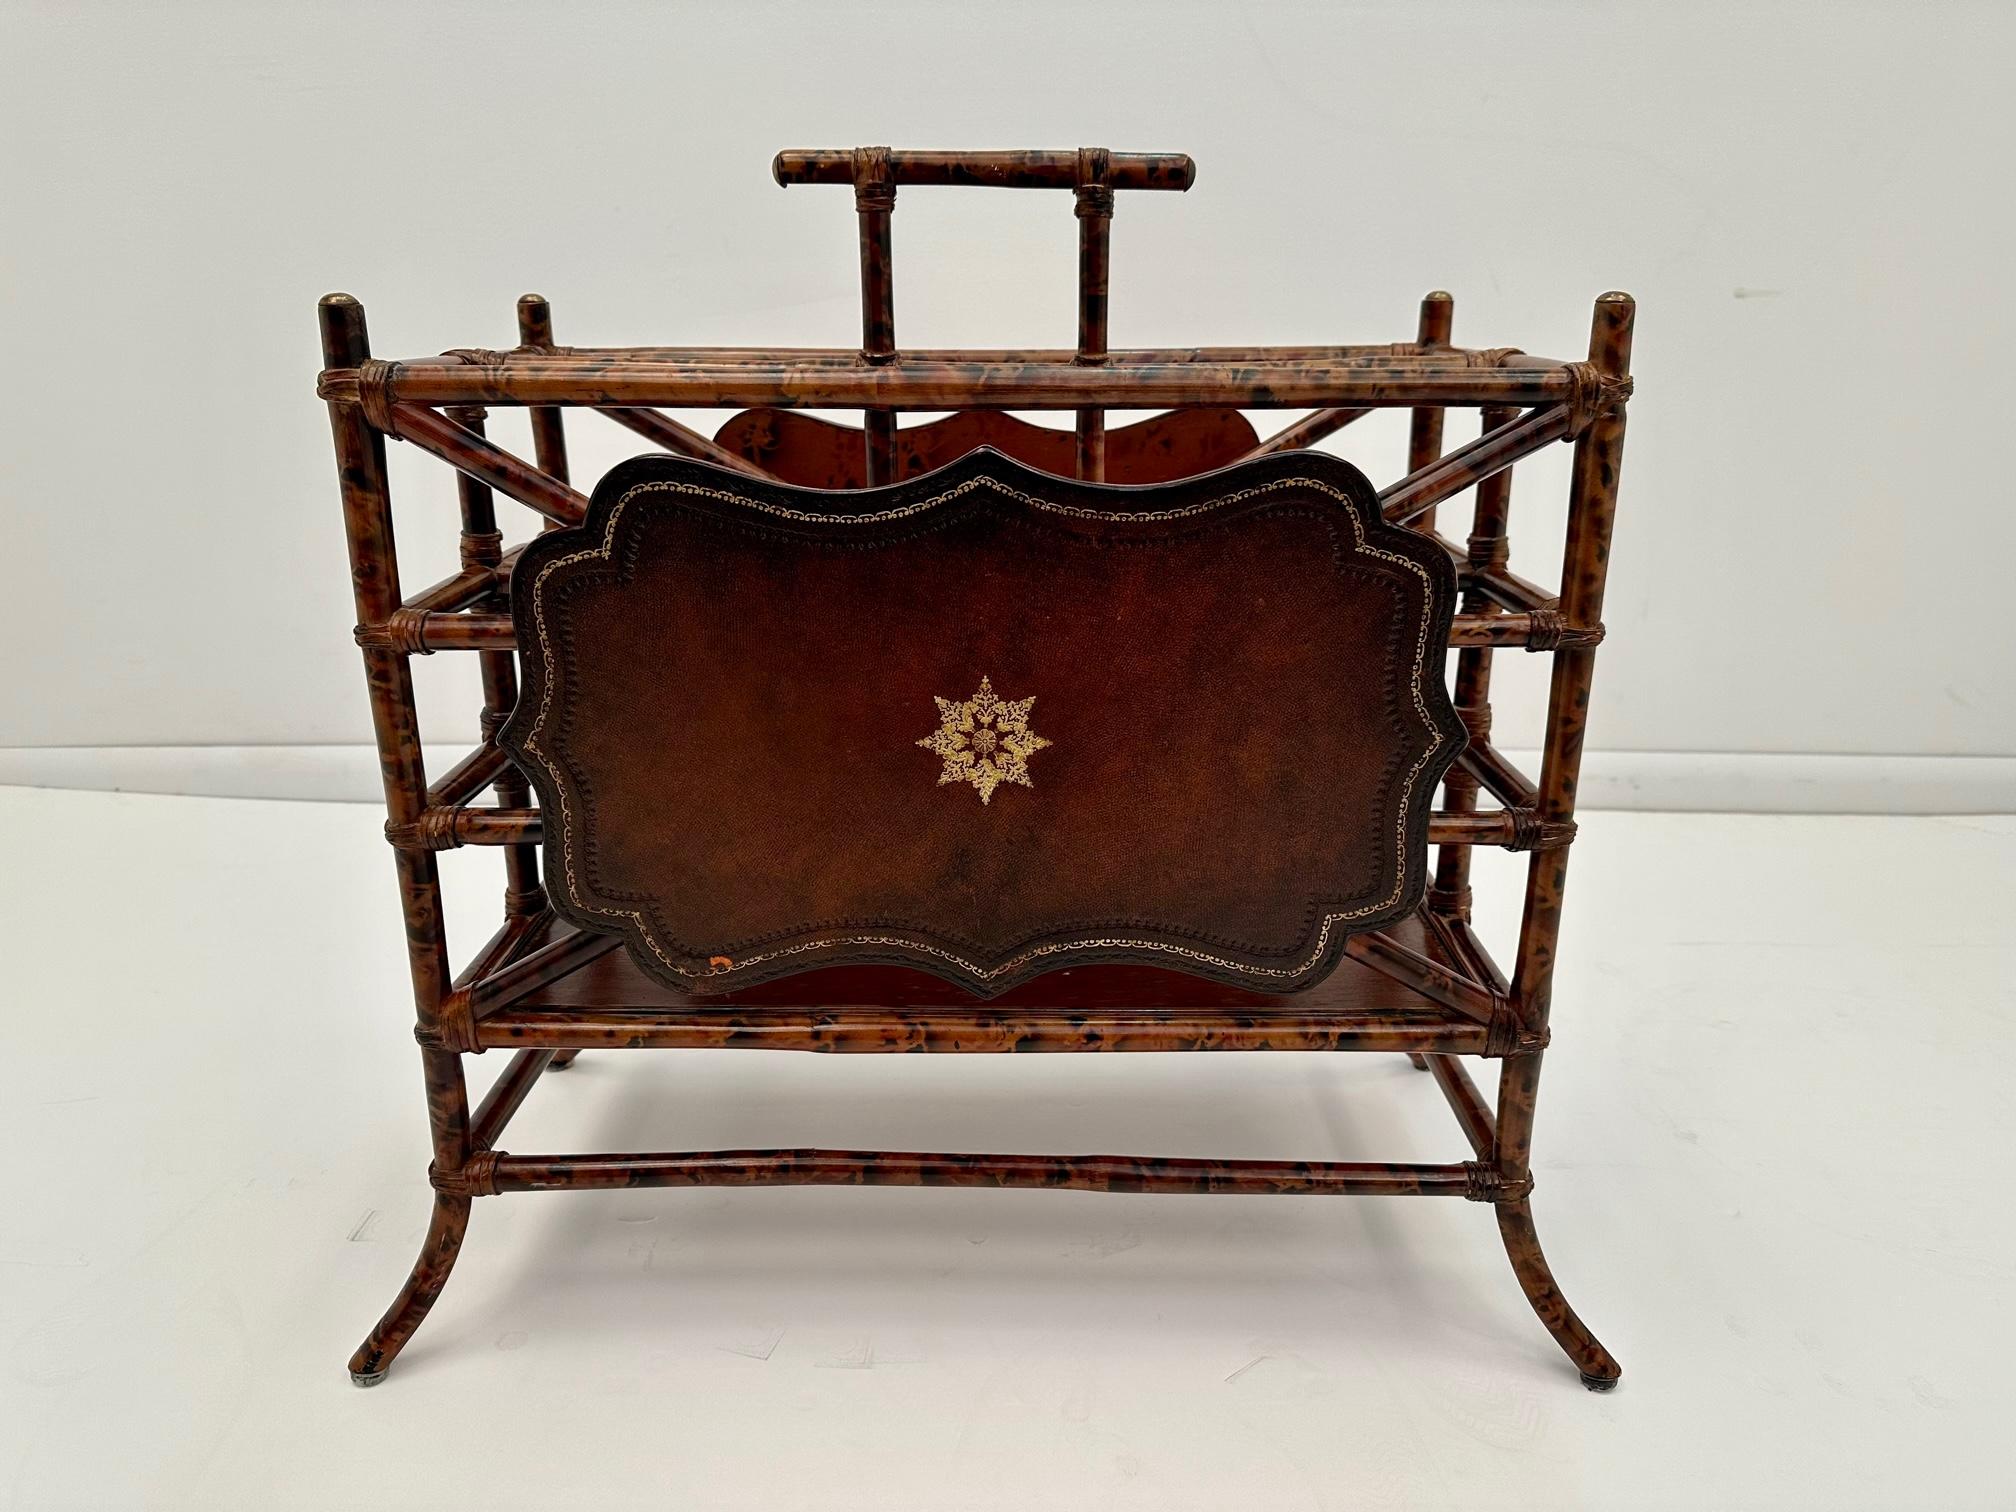 Stunning beautifully made magazine rack by Maitland Smith having its signature tooled leather with gold medallion embellishment, brass details and faux bamboo structure.